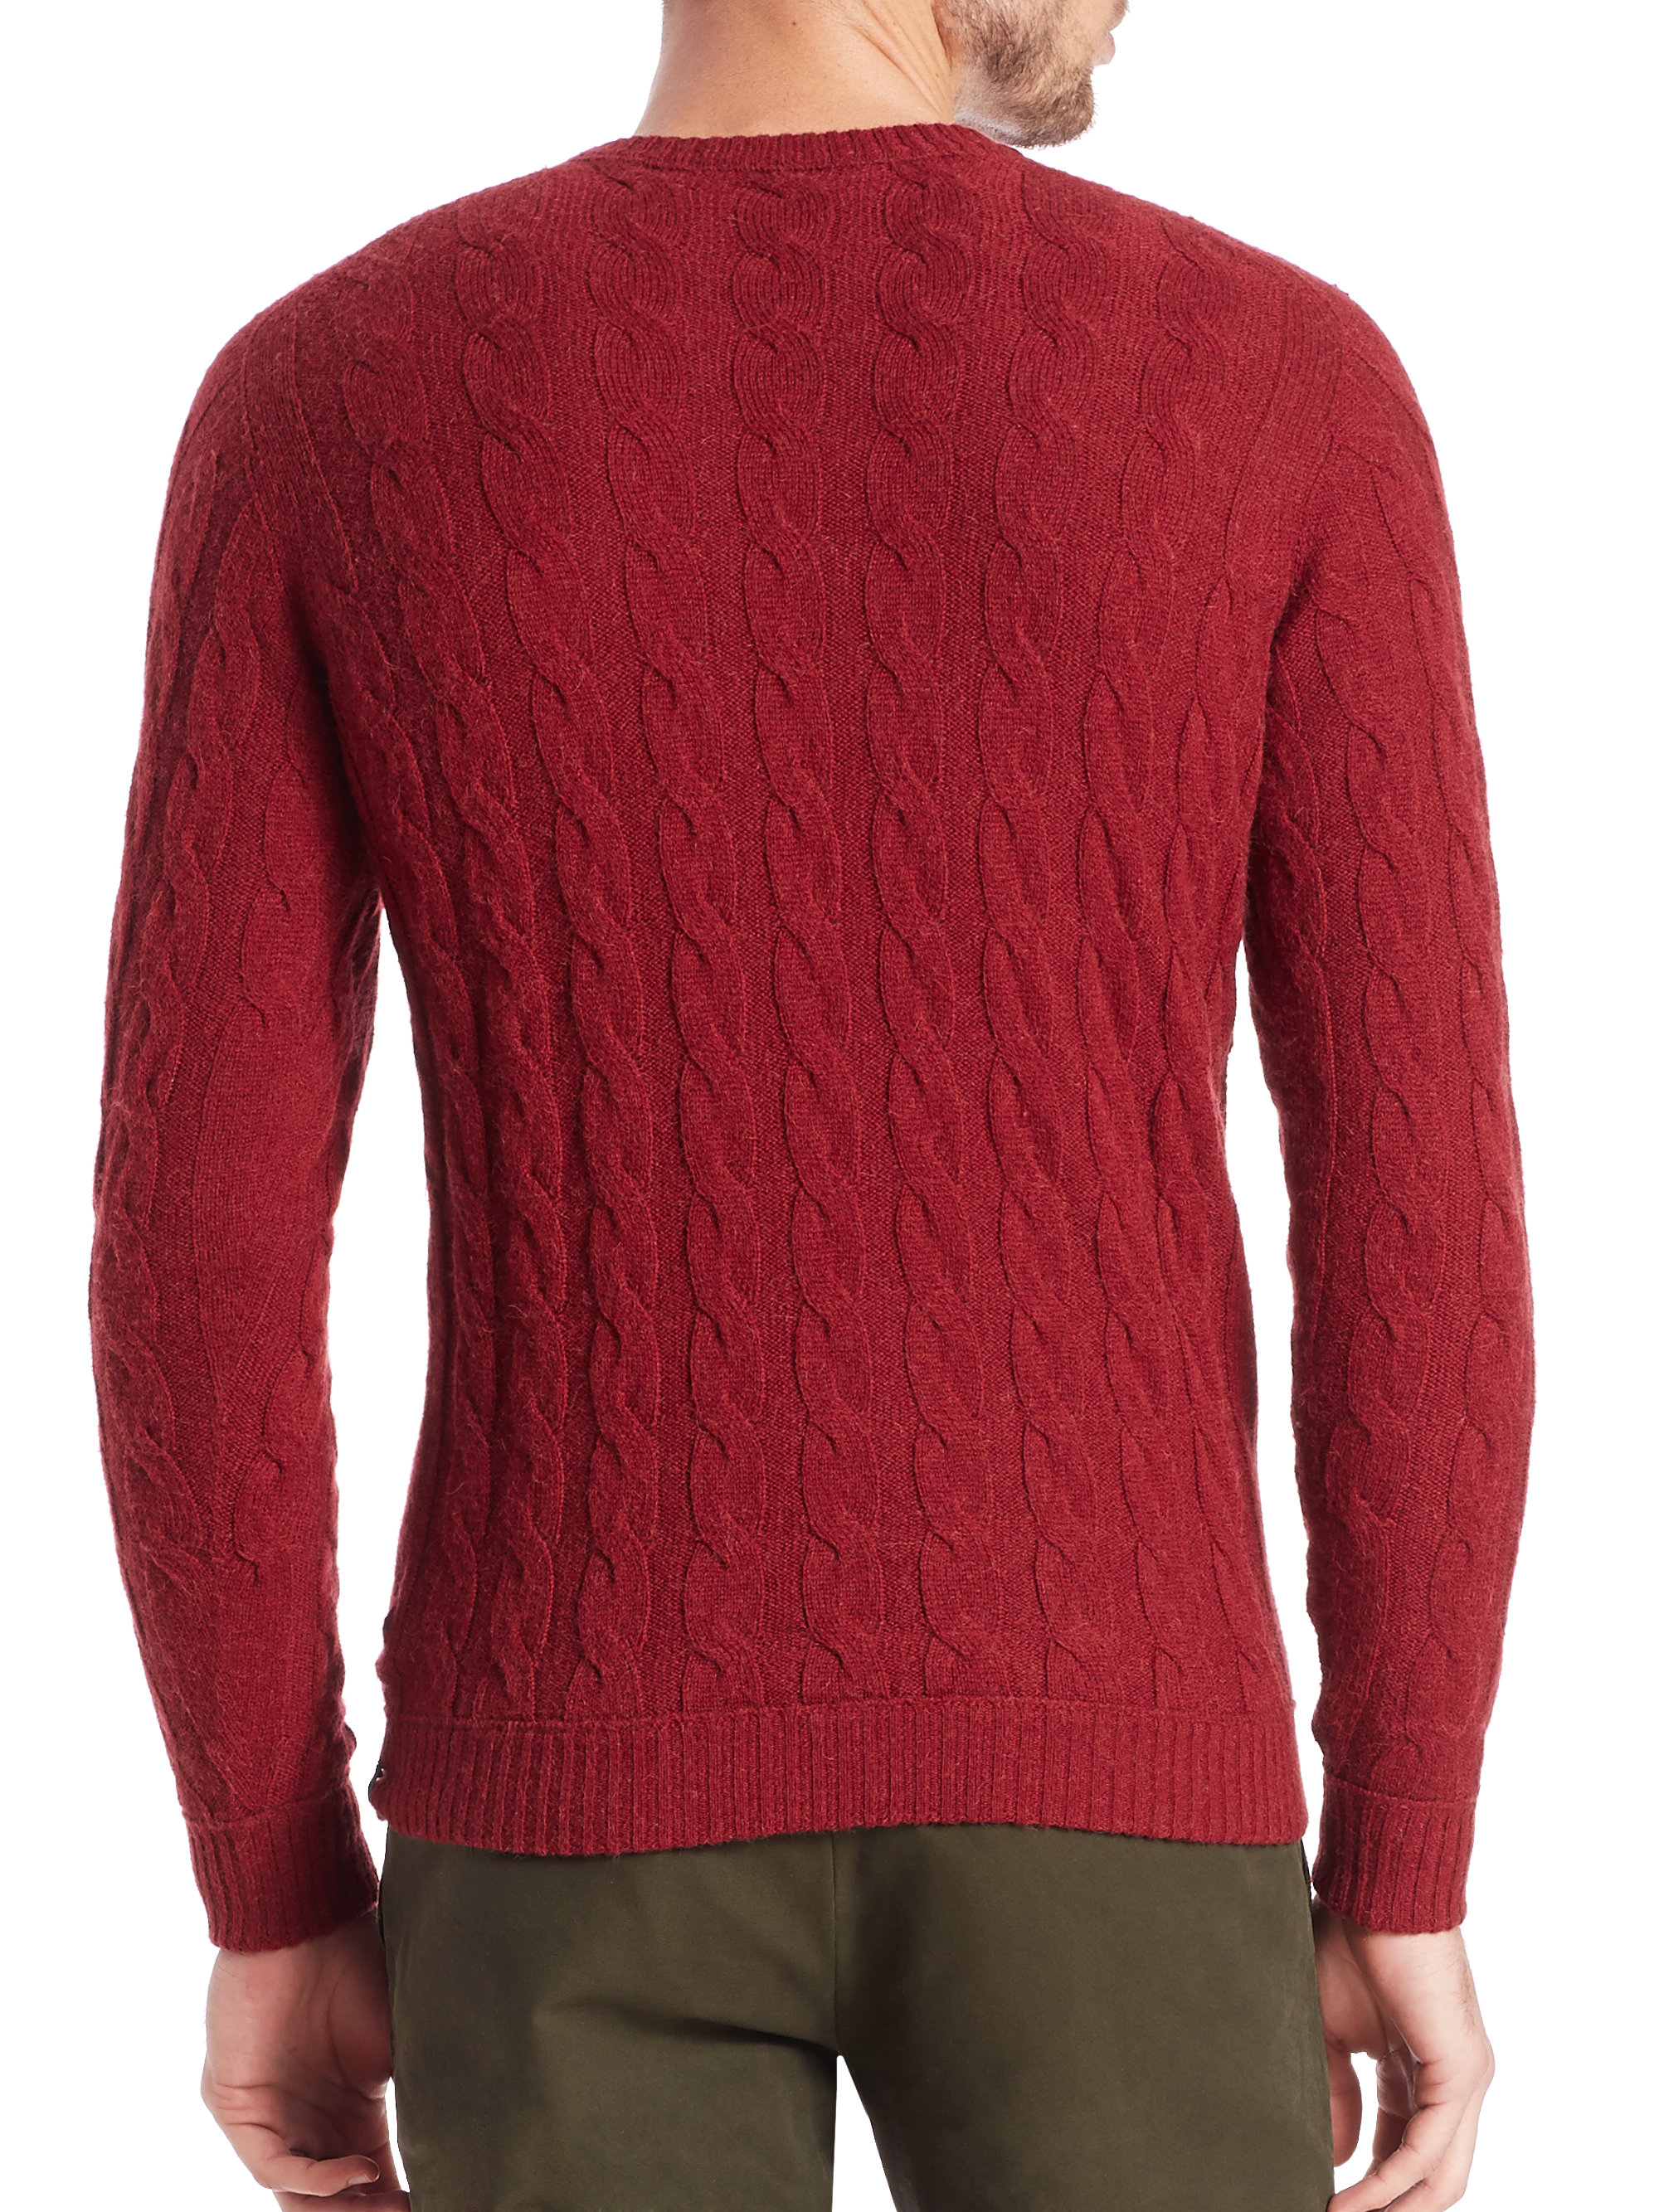 Lyst - Slowear Camel Hair Cable-knit Sweater in Red for Men